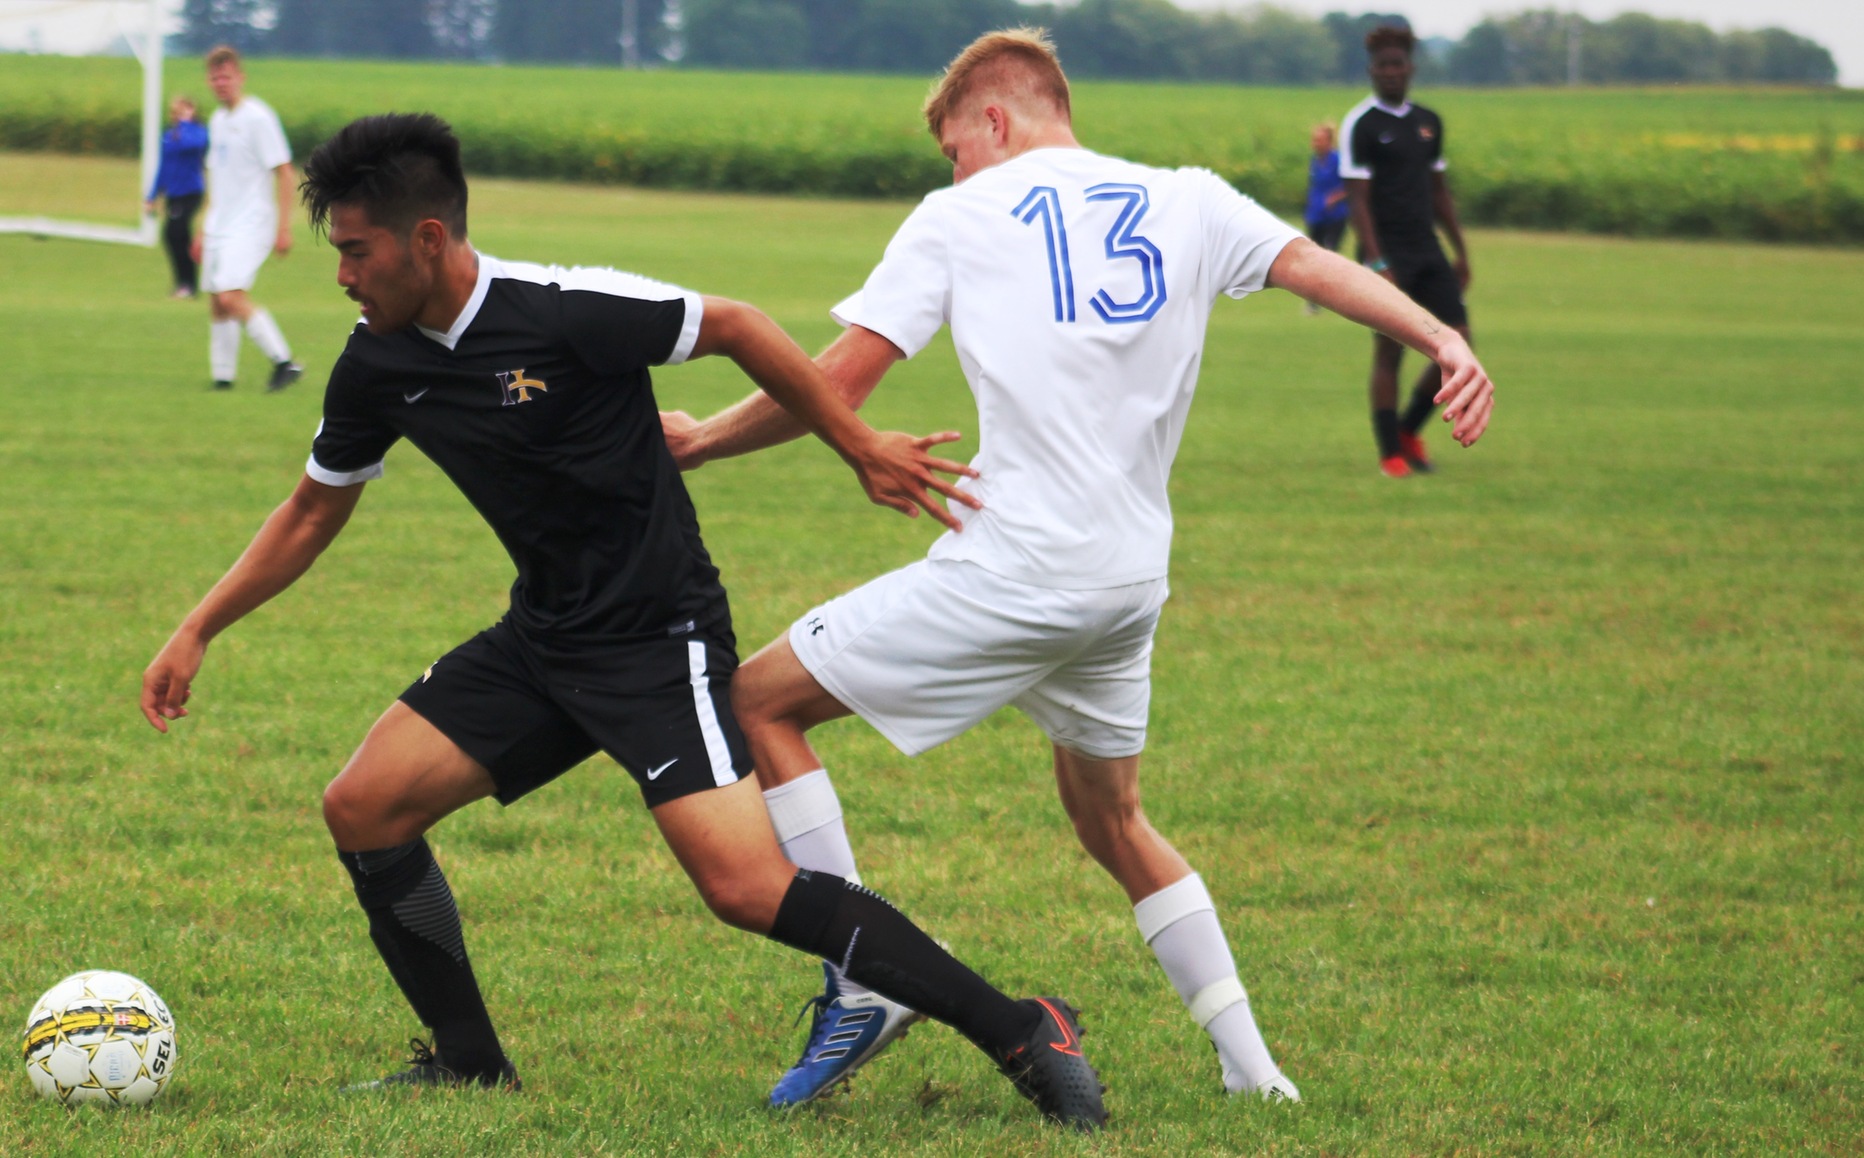 NIACC's Aidan de Boer (13) battles for the ball in a match against Indian Hills last month.